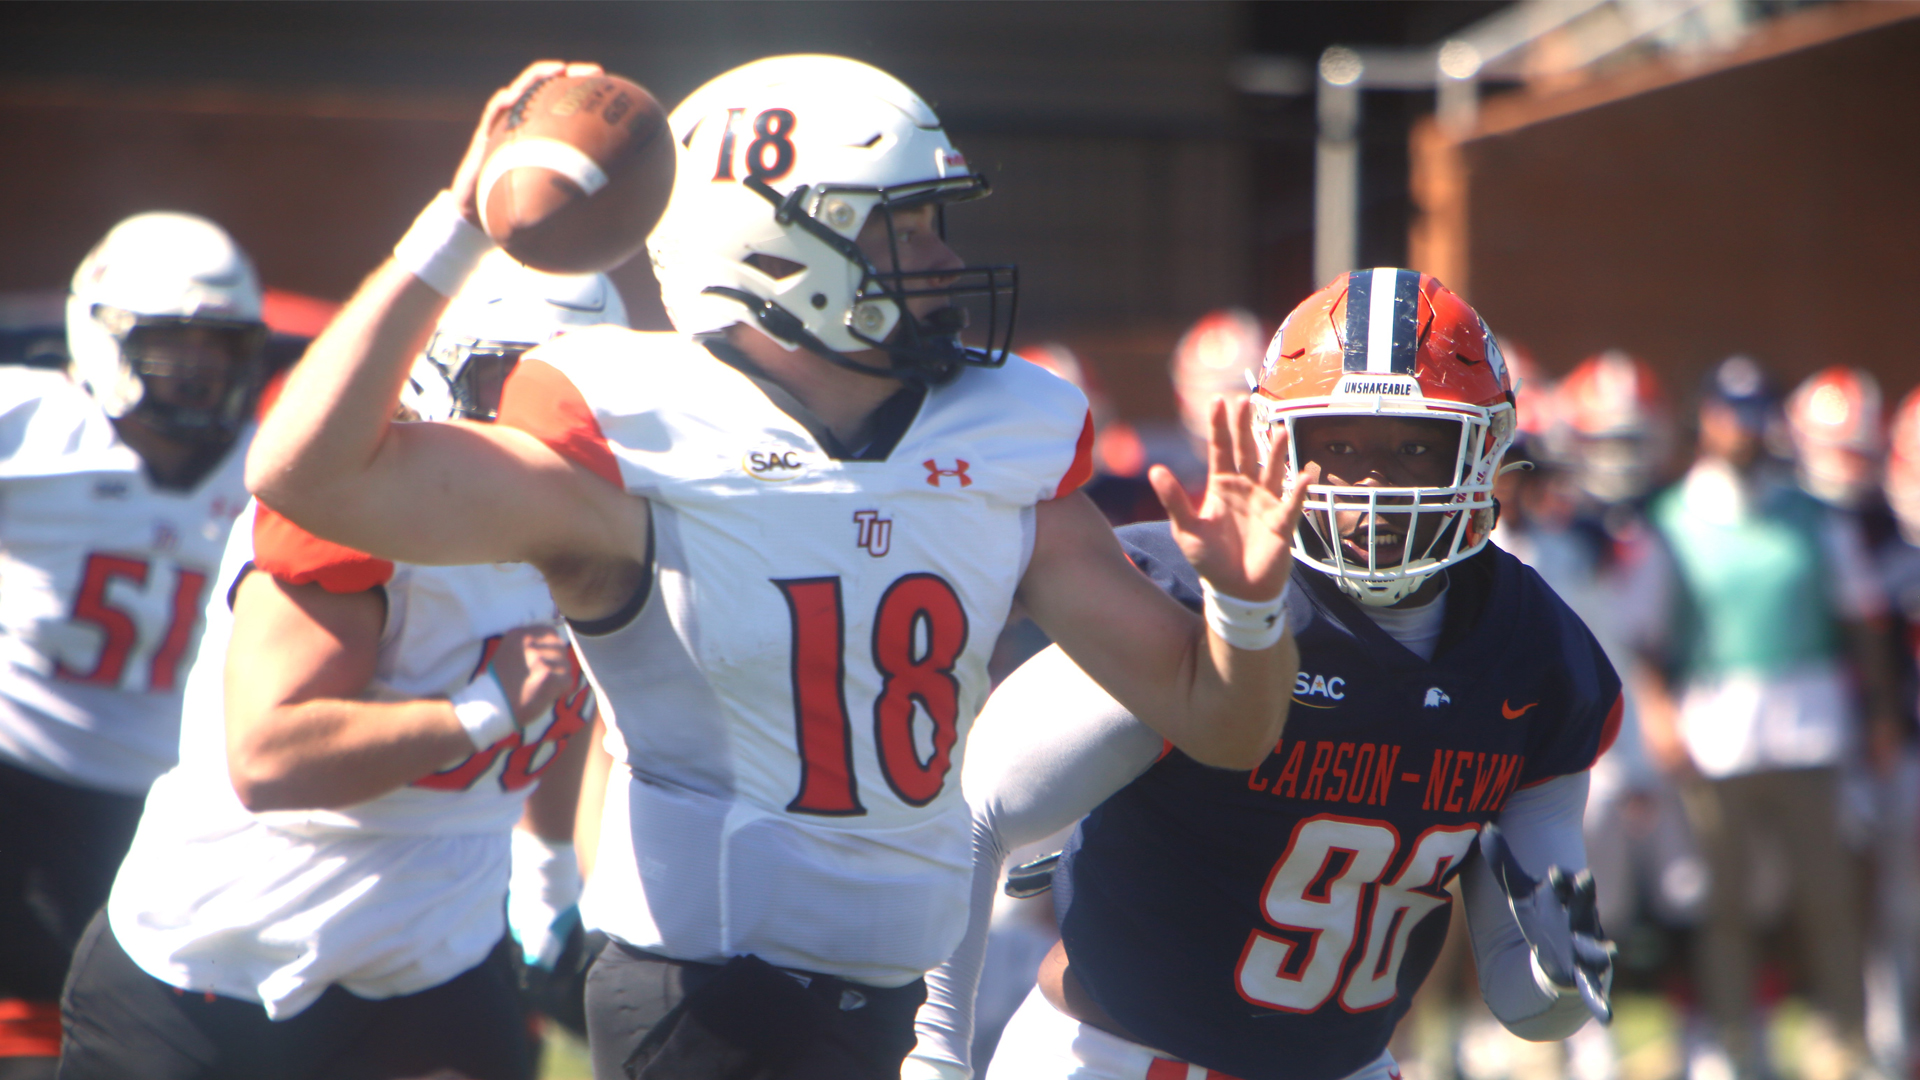 Matthew Palazzo threw for 370 yards and four touchdowns in Tusculum's 27-21 win at Carson-Newman (photo by Dom Donnelly)